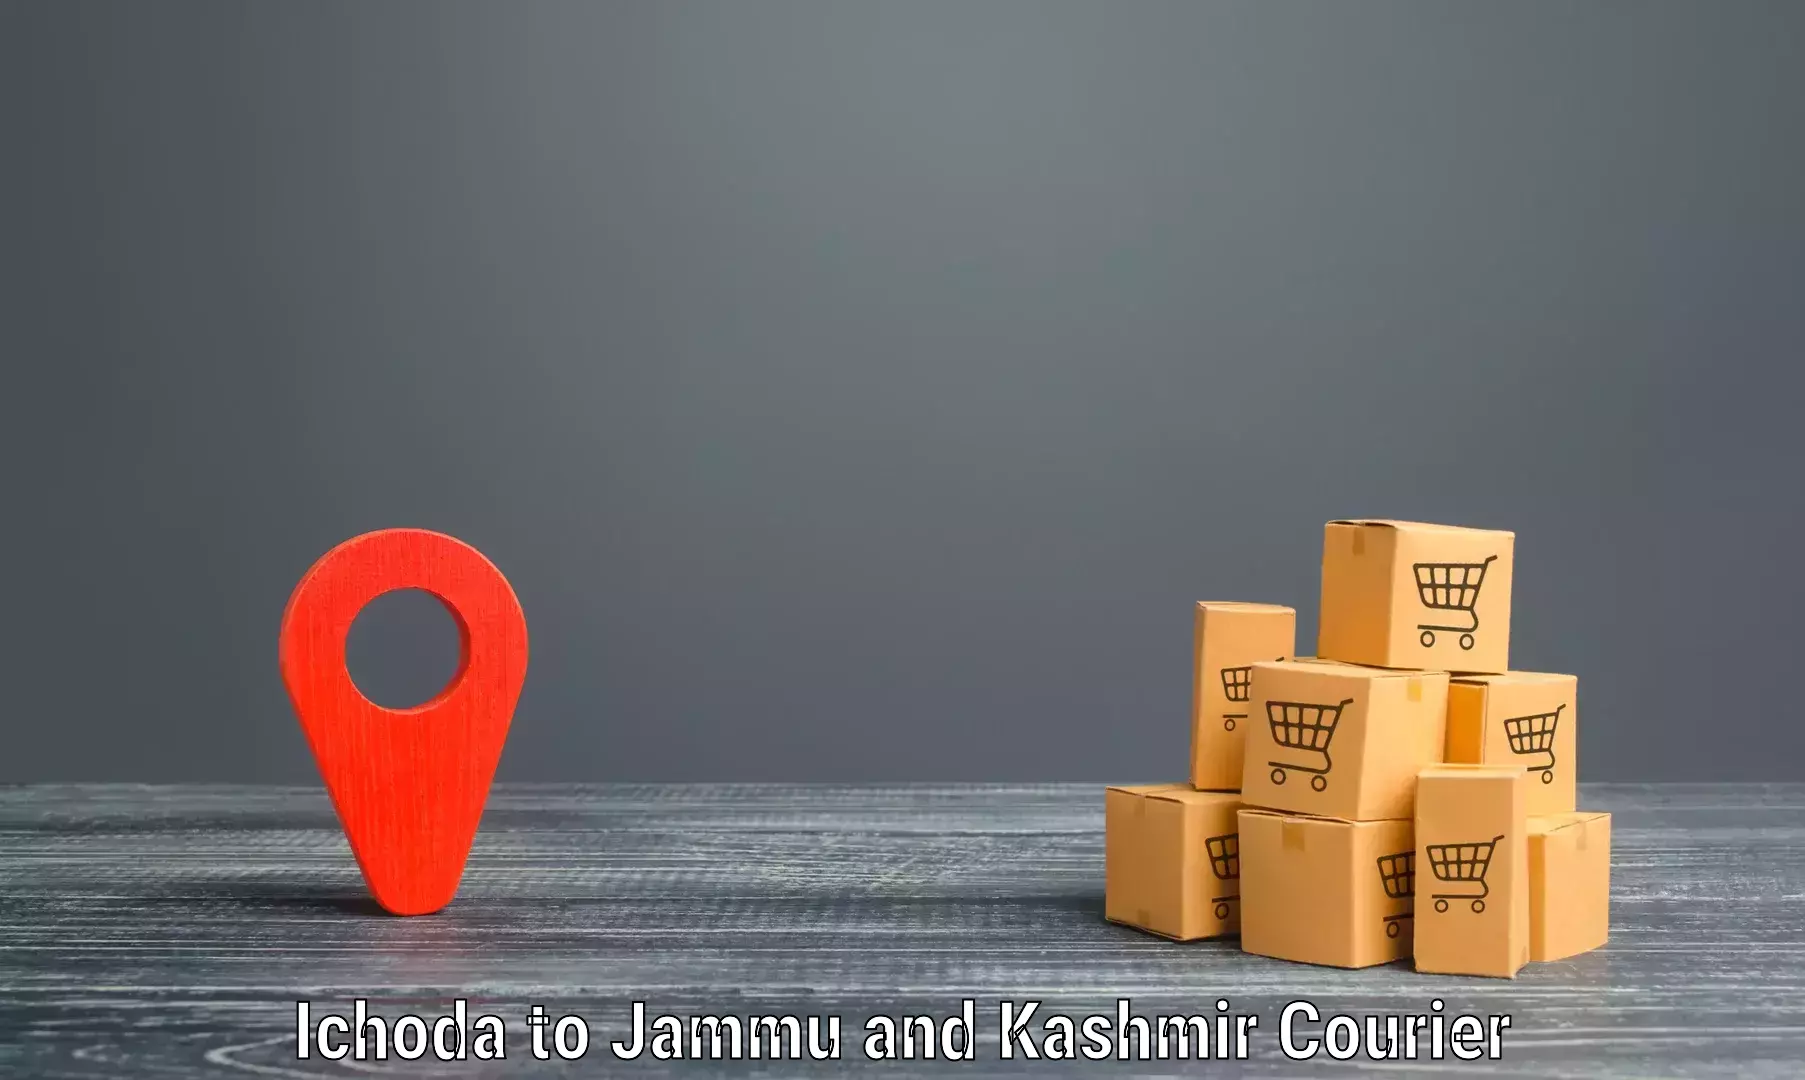 Global shipping networks Ichoda to Jakh